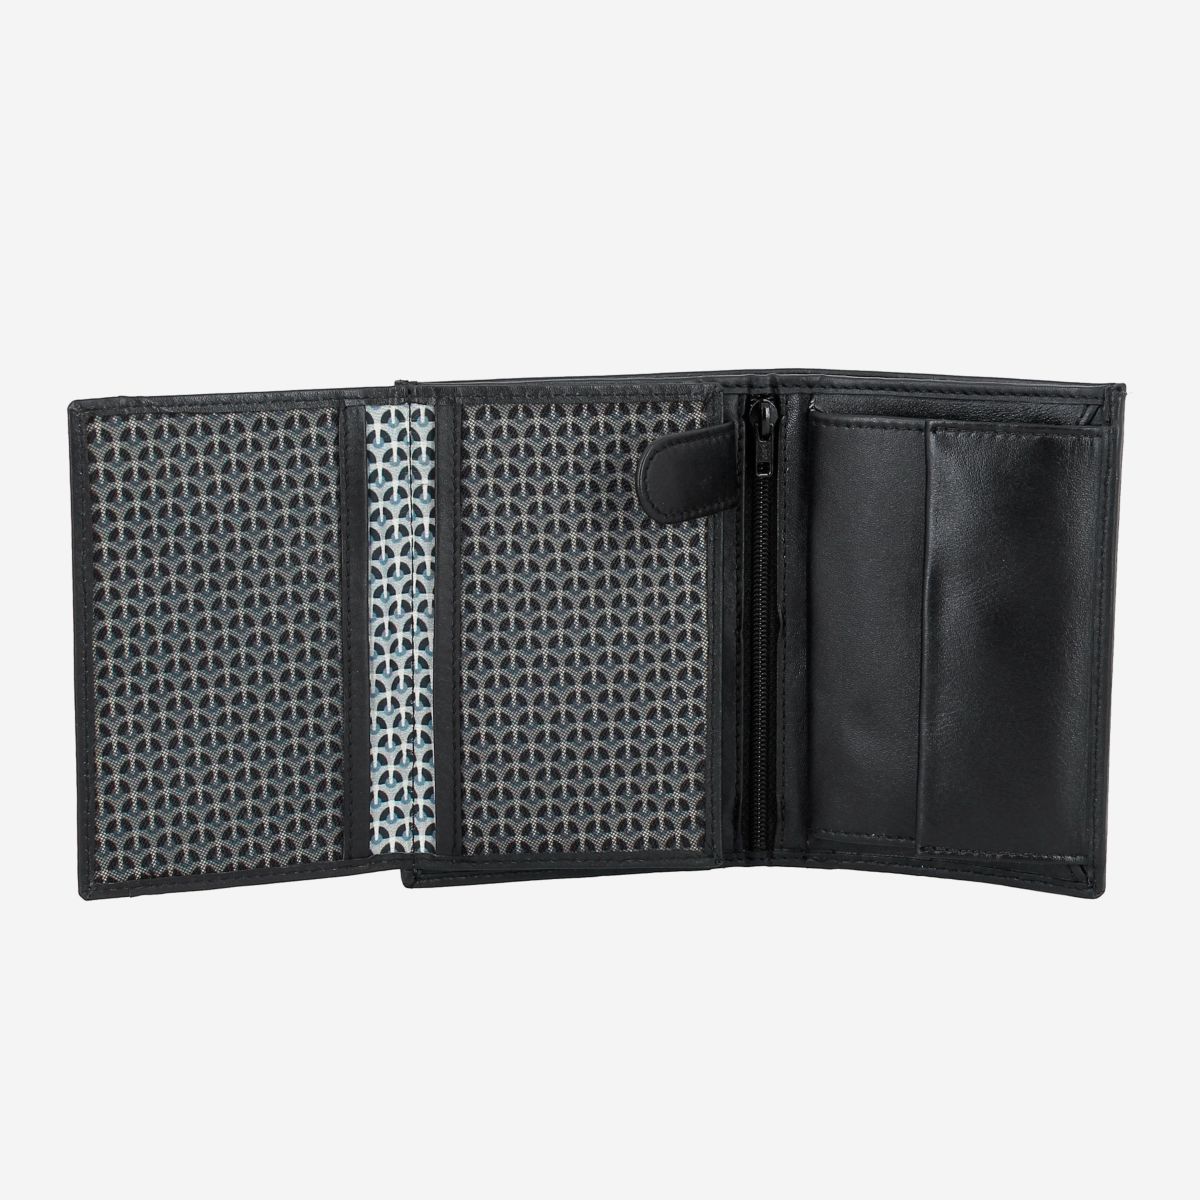 NUVOLA PELLE Mens Vertical Wallet With Coin Pocket - Black